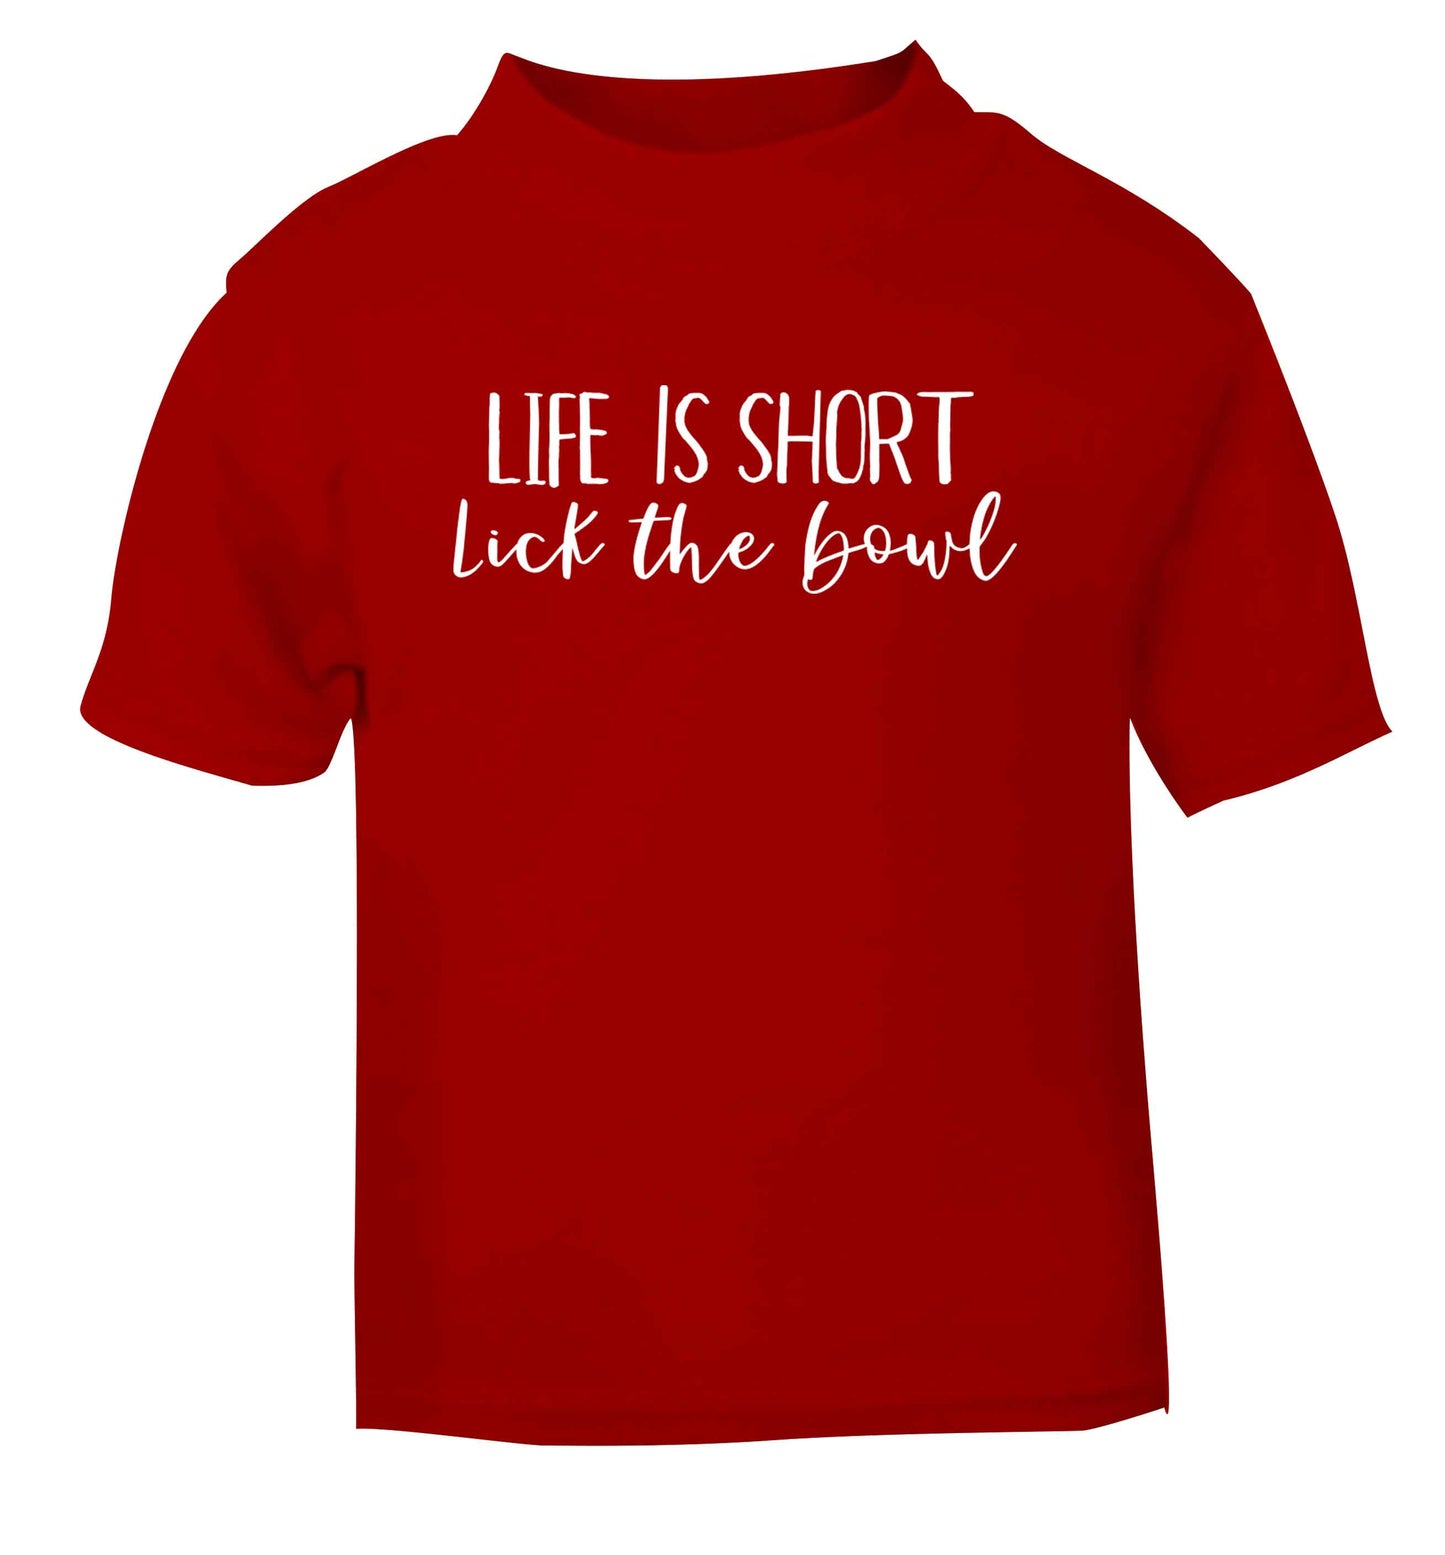 Life is short lick the bowl red Baby Toddler Tshirt 2 Years